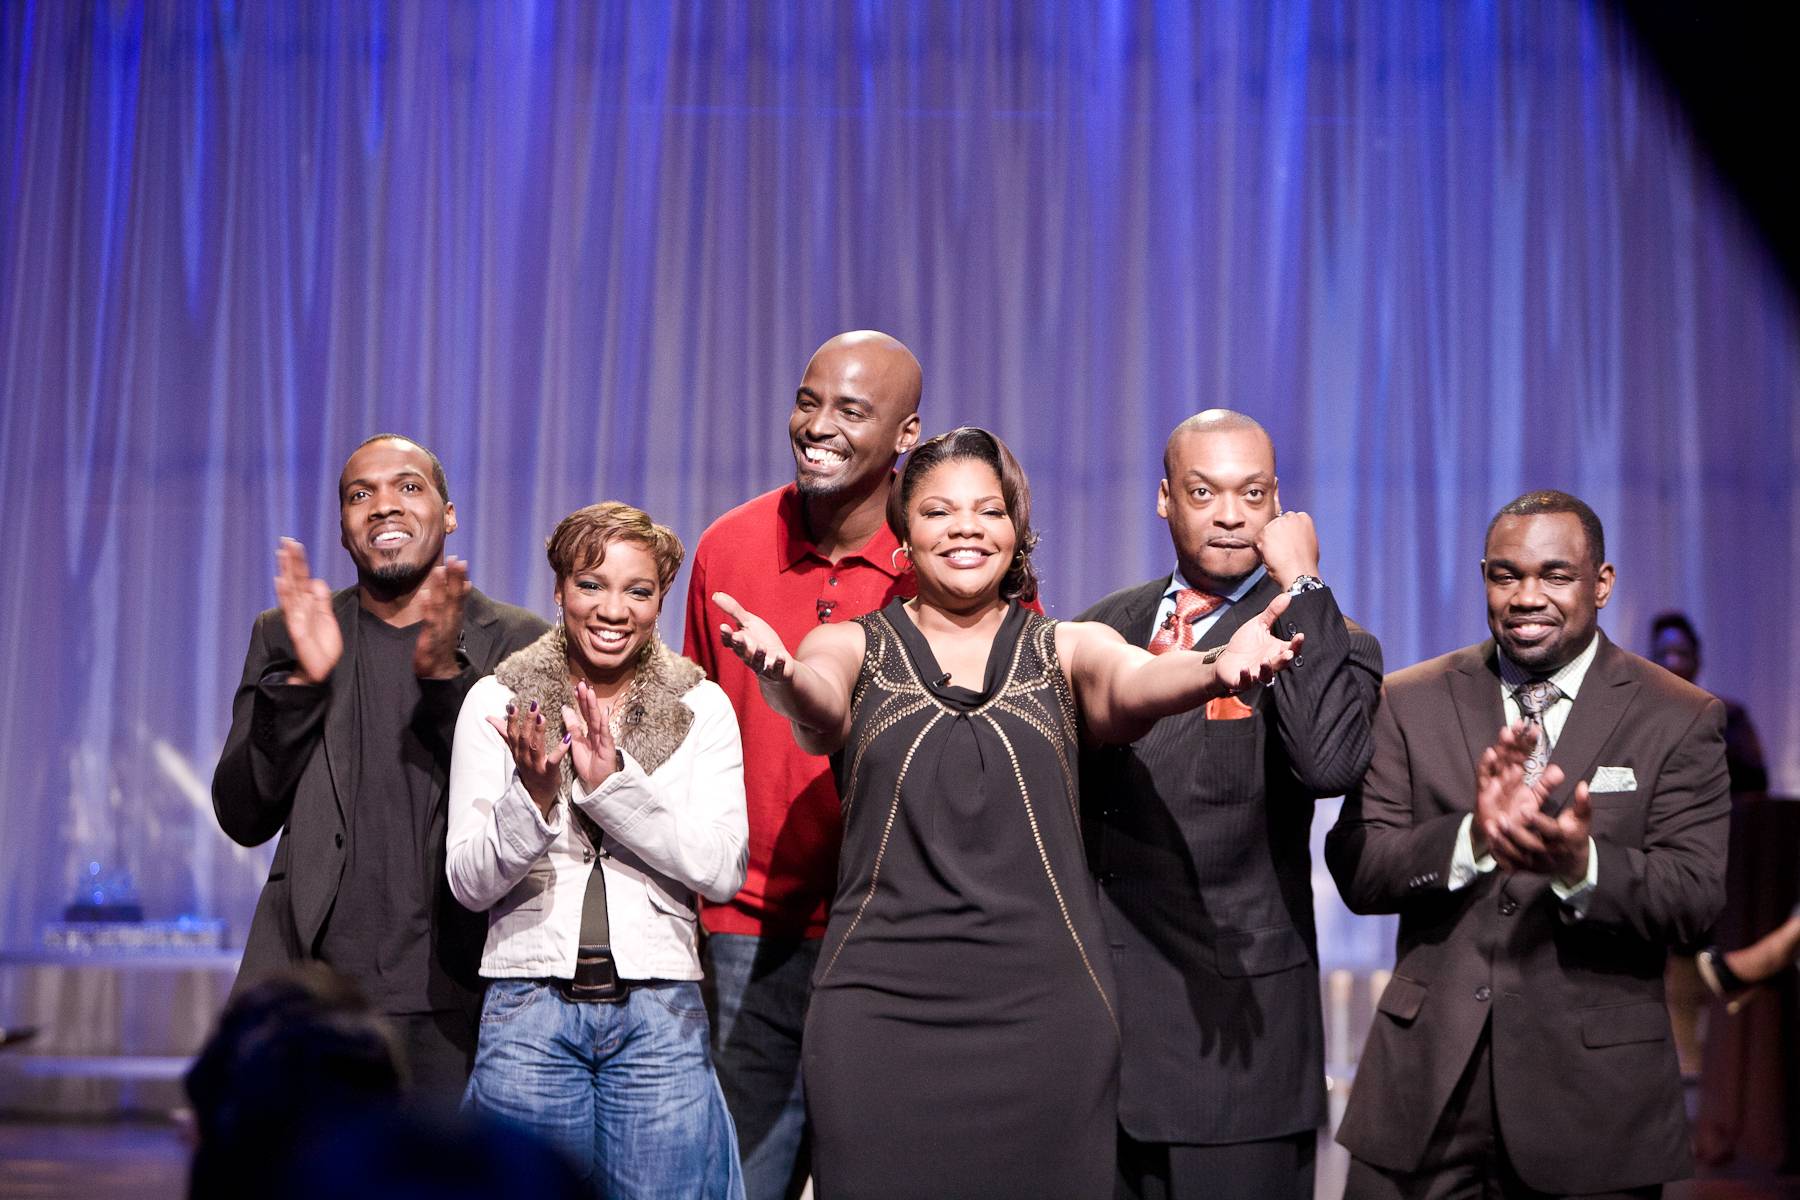 Farewell to Another Great Episode! - From left: Chris Jones, Small Fire, TuRae Gordon, Mo'Nique, Shaun Jones and Rodney Perry.(Photo: Darnell Williams/BET)